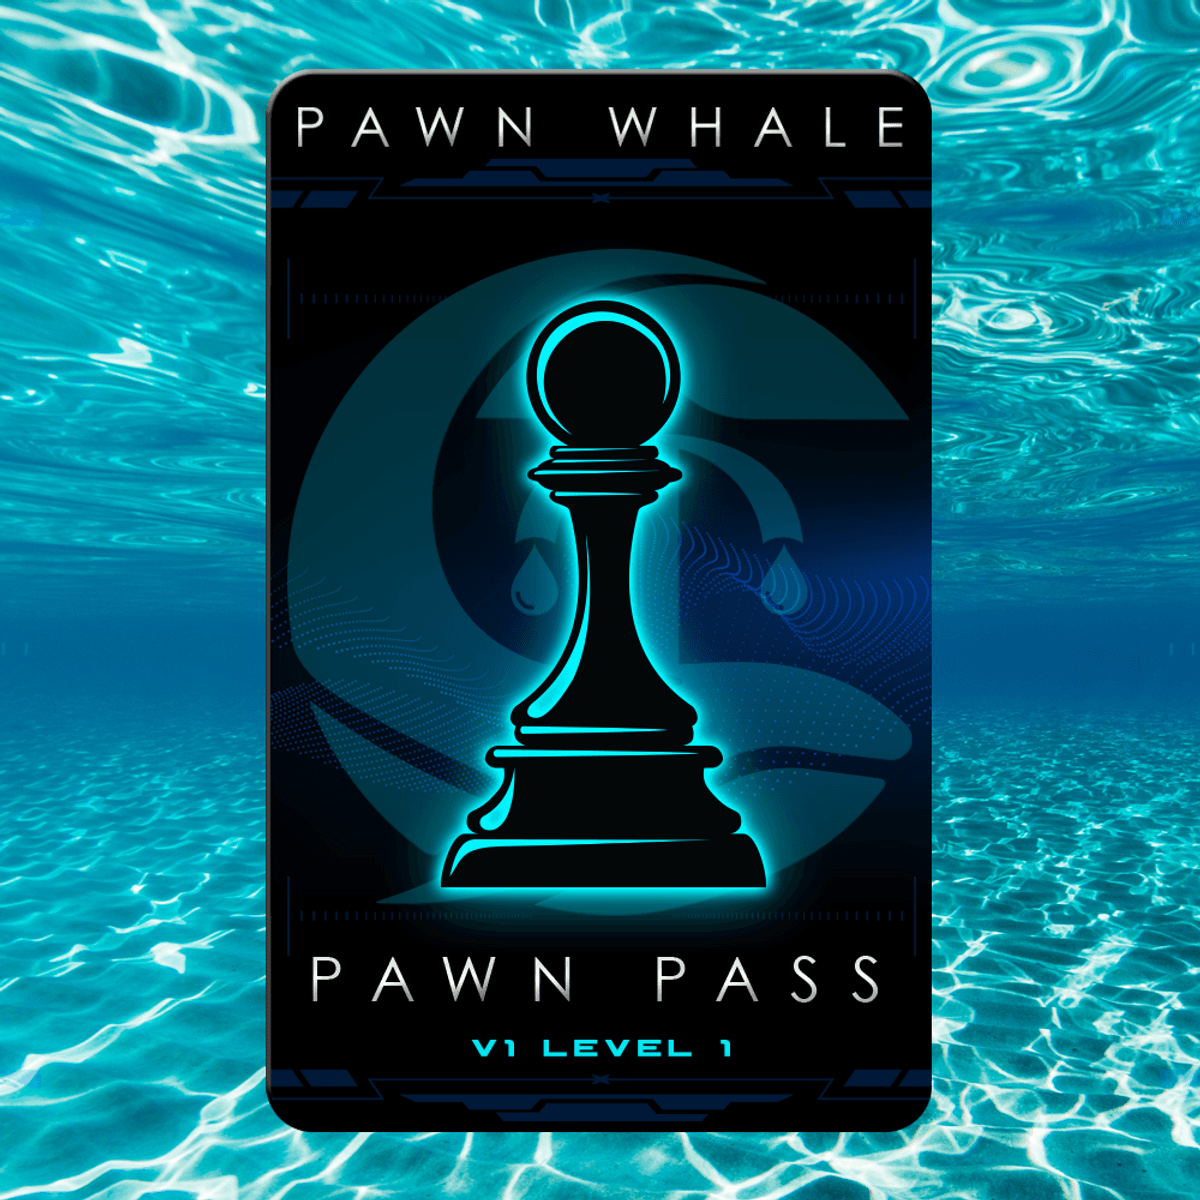 Pawn Whale Pass #1499